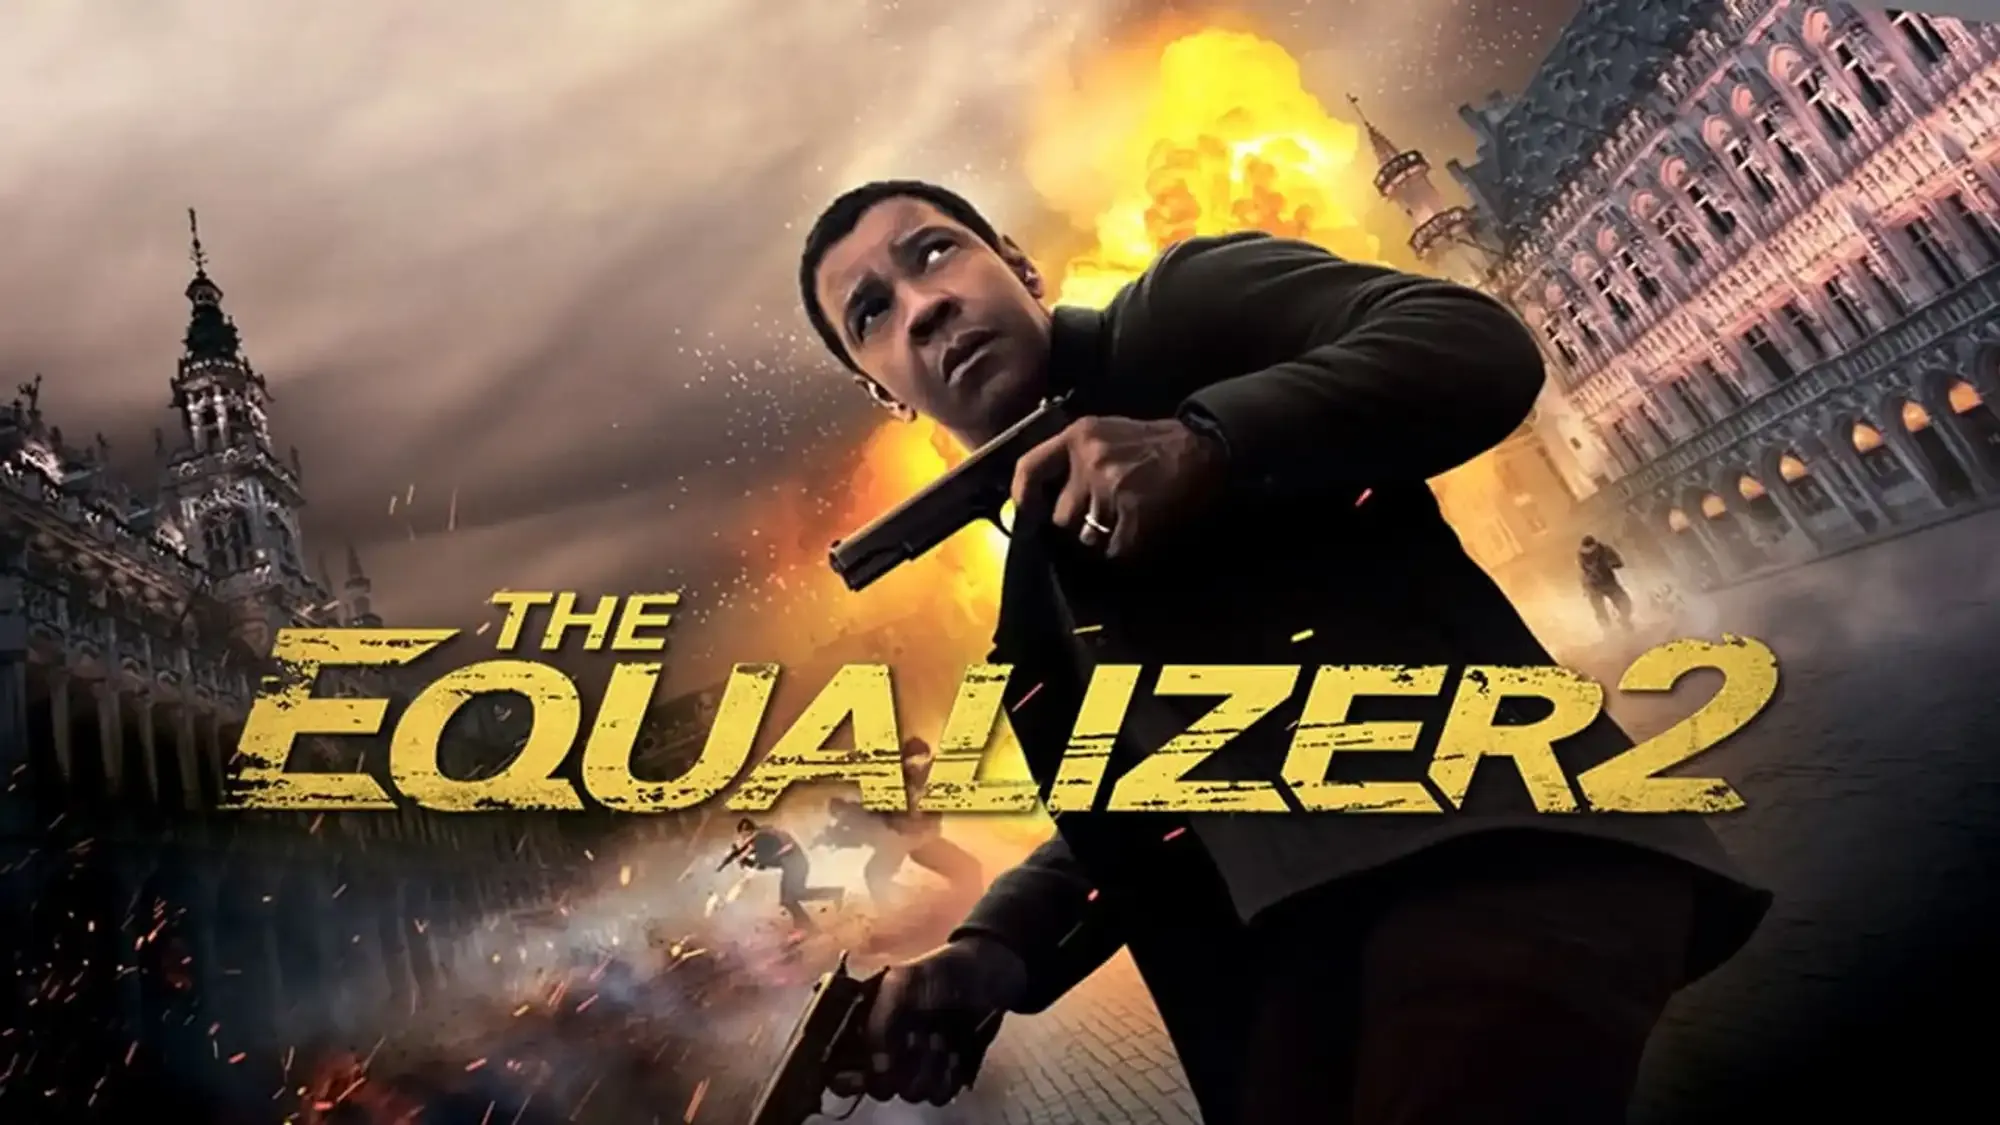 The Equalizer 2 movie review